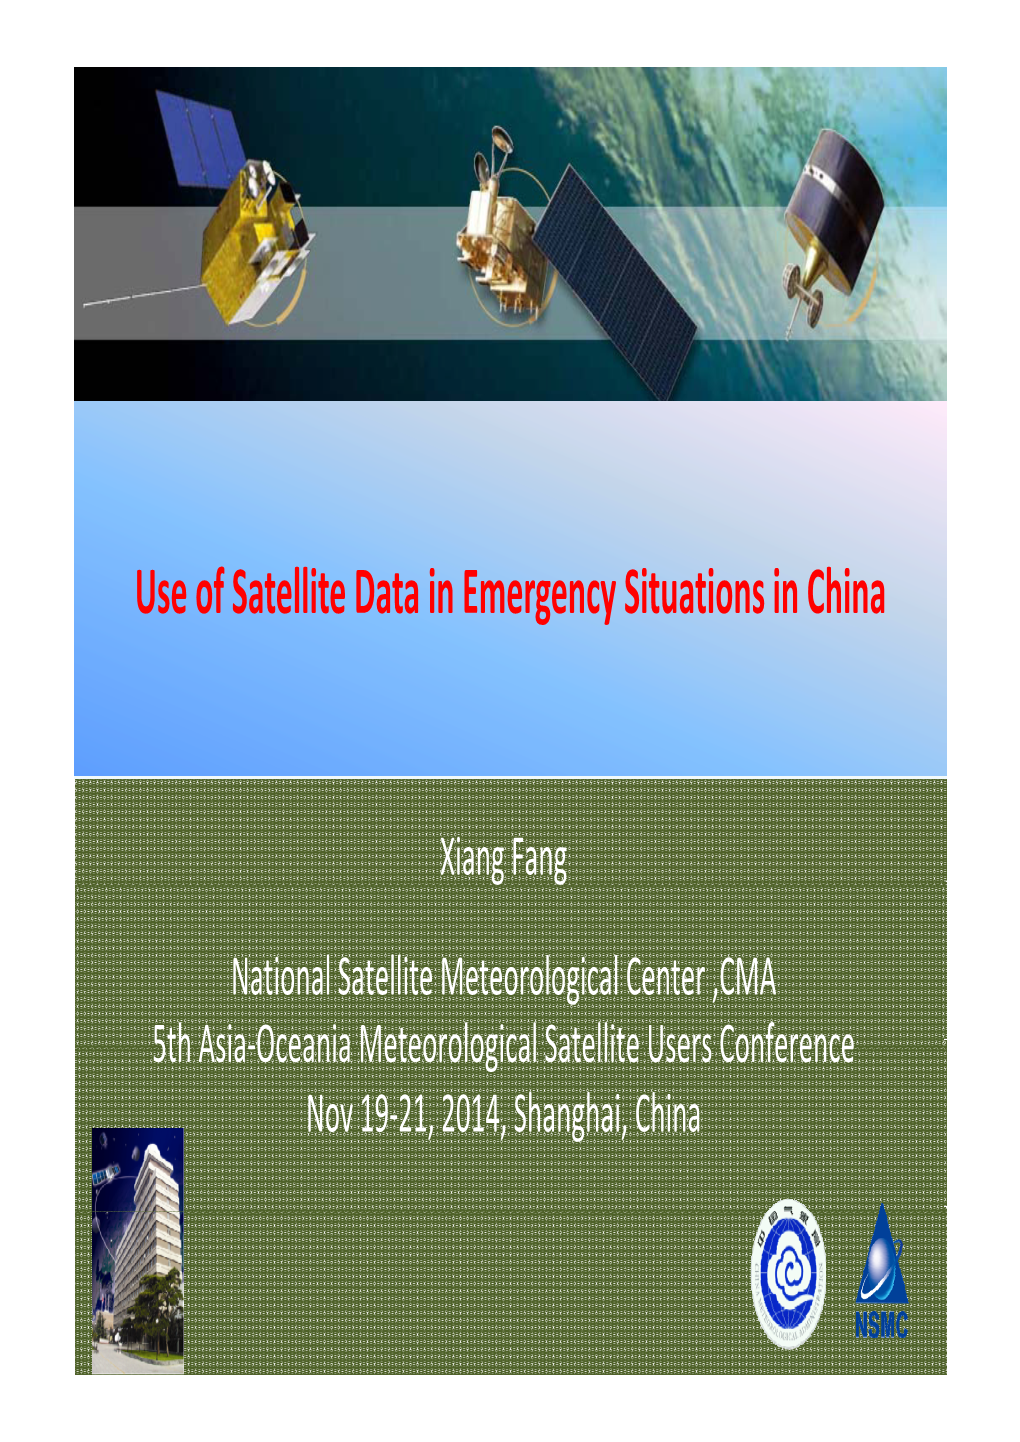 Use of Satellite Data in Emergency Situations in China